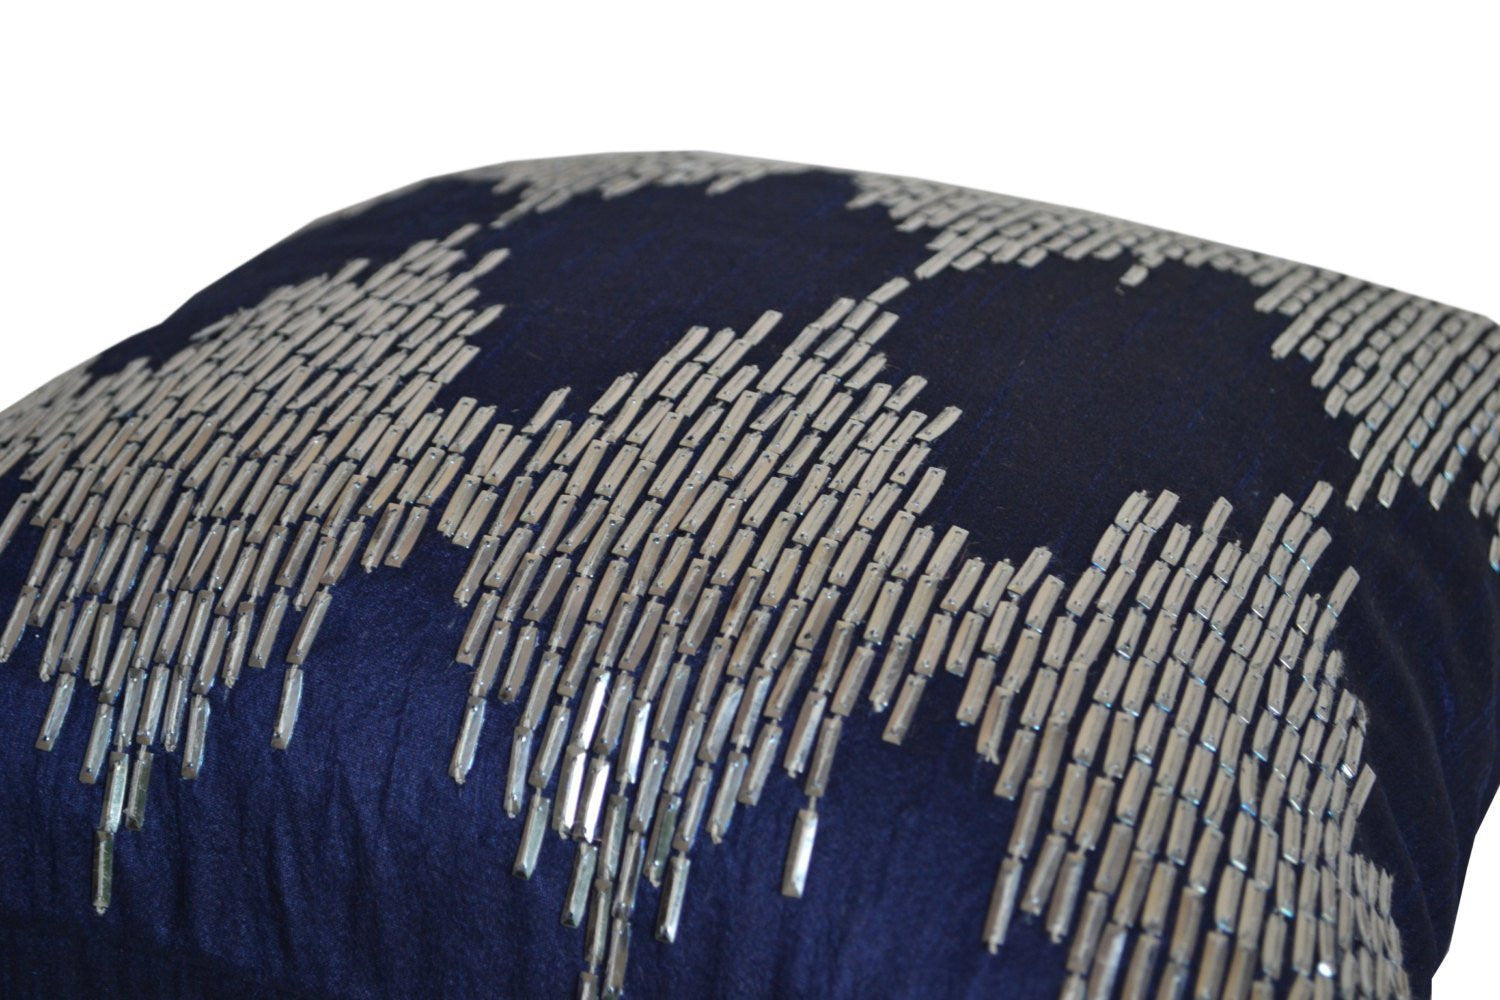 Amore Beaute navy blue sequin pillow cover adds a captivating element of glamour and fashion to any corner, bed, sofa, chair in your home.